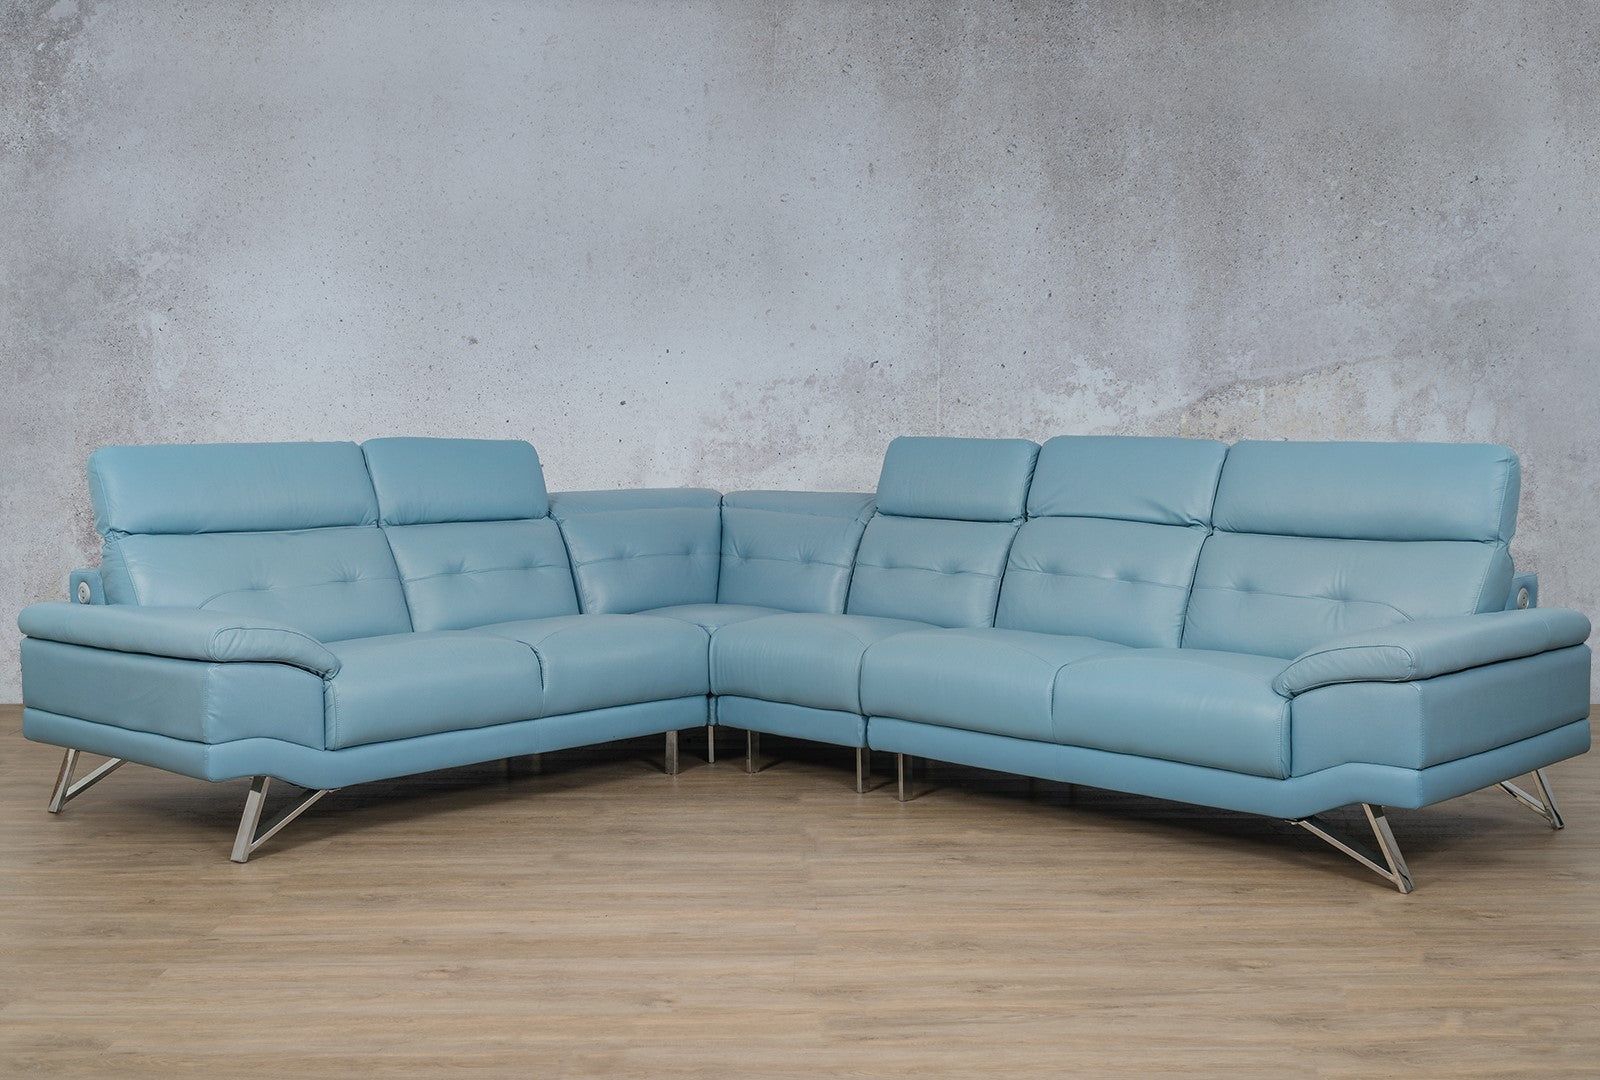 The blue couch